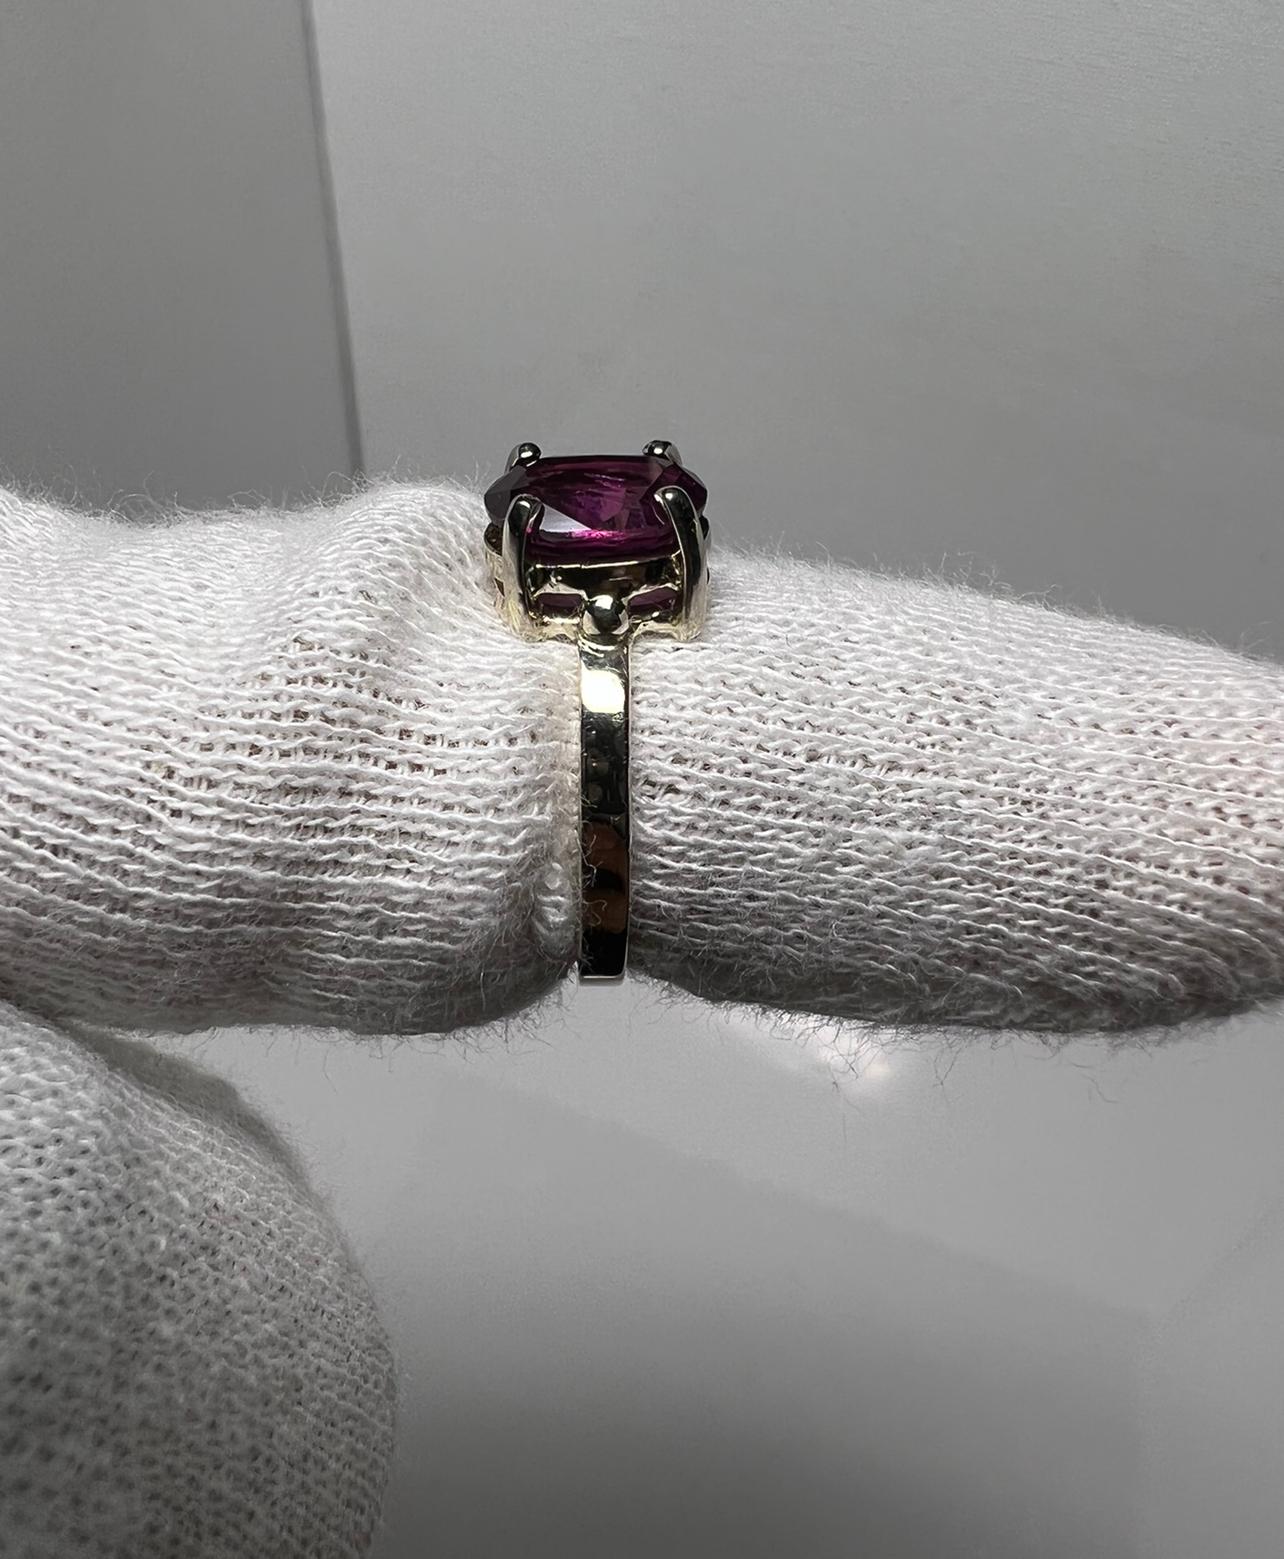 This EyeClean 2.17 Carat Pink Purple Kashmir Sapphire is GIA Certified and has a  very beautiful eye catching color. It’s bright and lively and rare to possess in this clarity and color . It’s a very clean jewel with no inclusions. (Eyeclean) It has